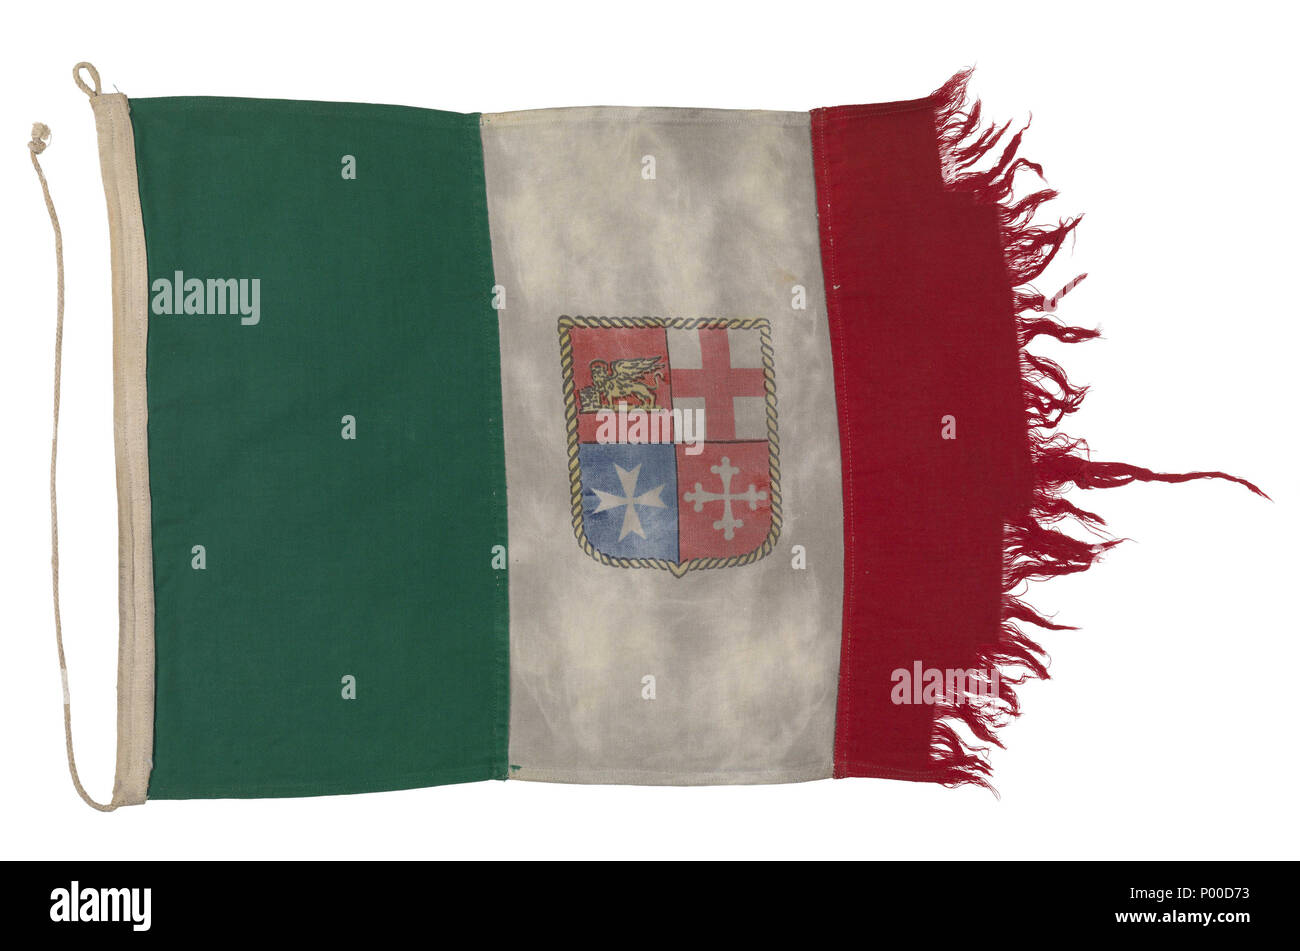 English: Italian merchant ensign (after 1946) Italian merchant ensign, after 1946 pattern, from the Thames hydrofoil del Vesuvio'. The flag is made of cotton bunting, machine sewn with a cord